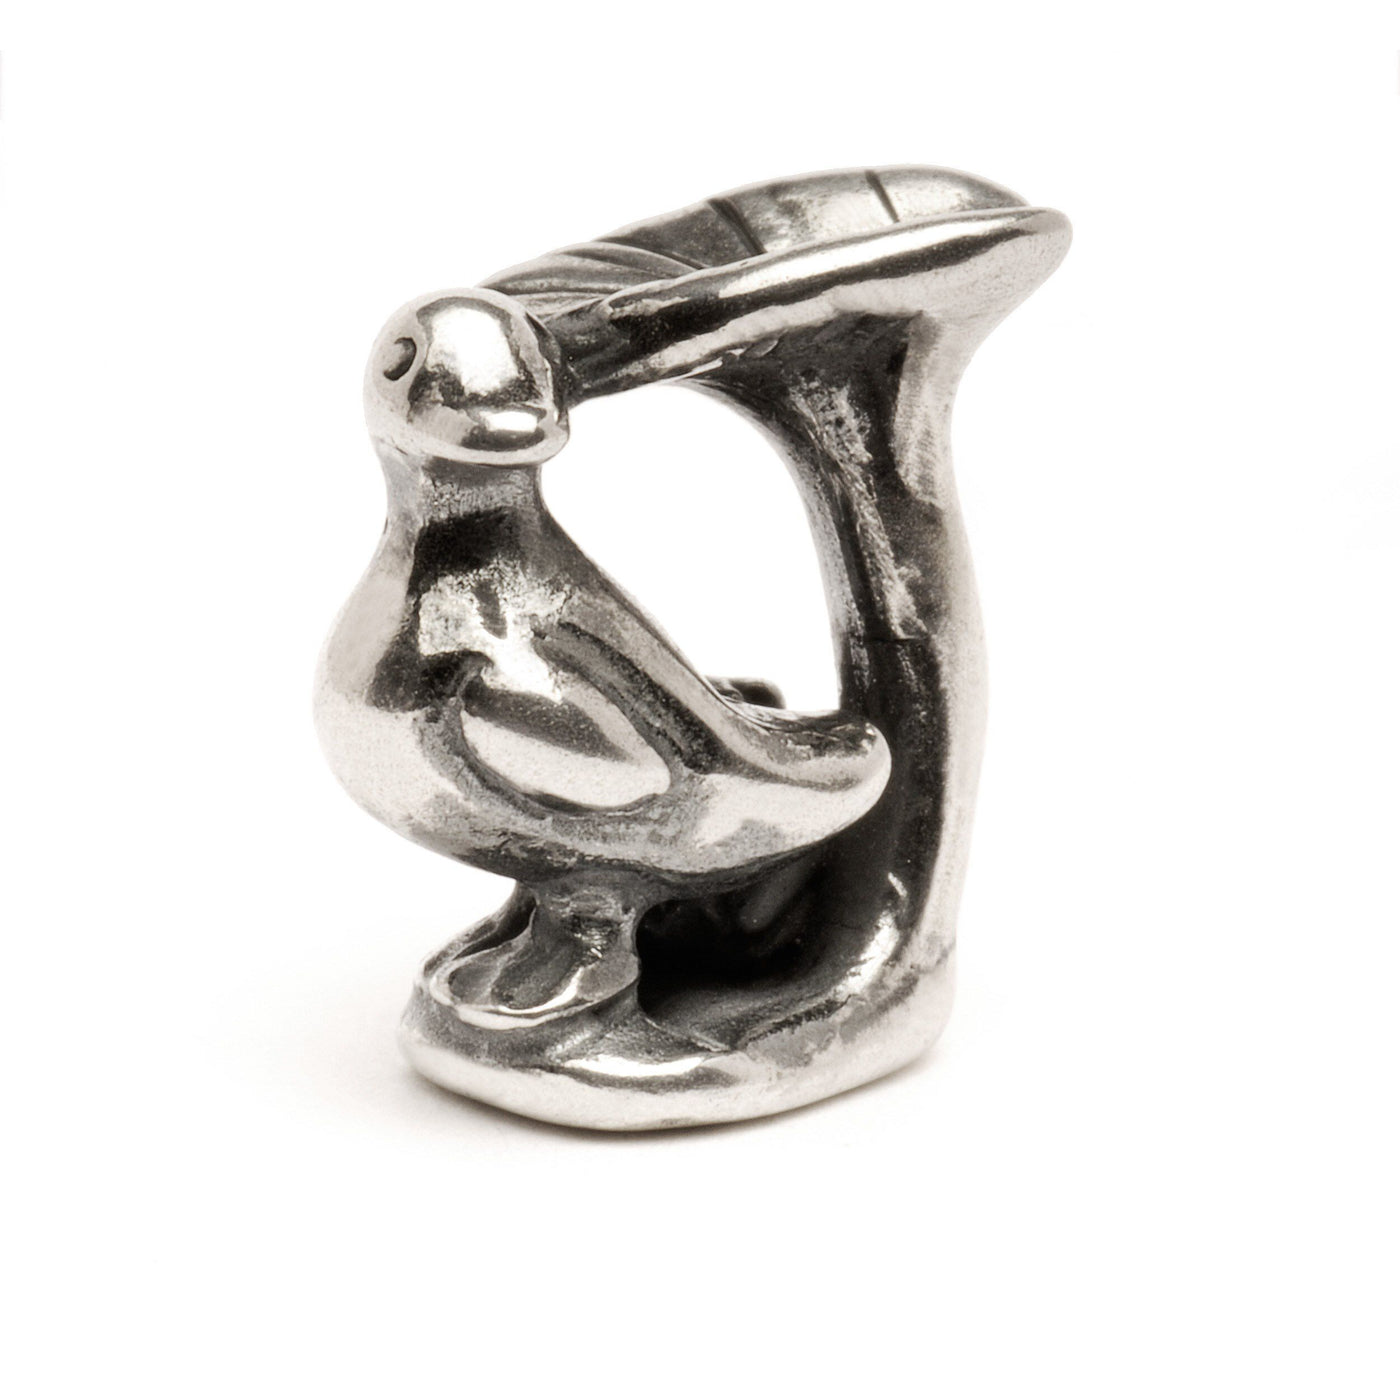 The Ugly Duckling - Trollbeads Canada